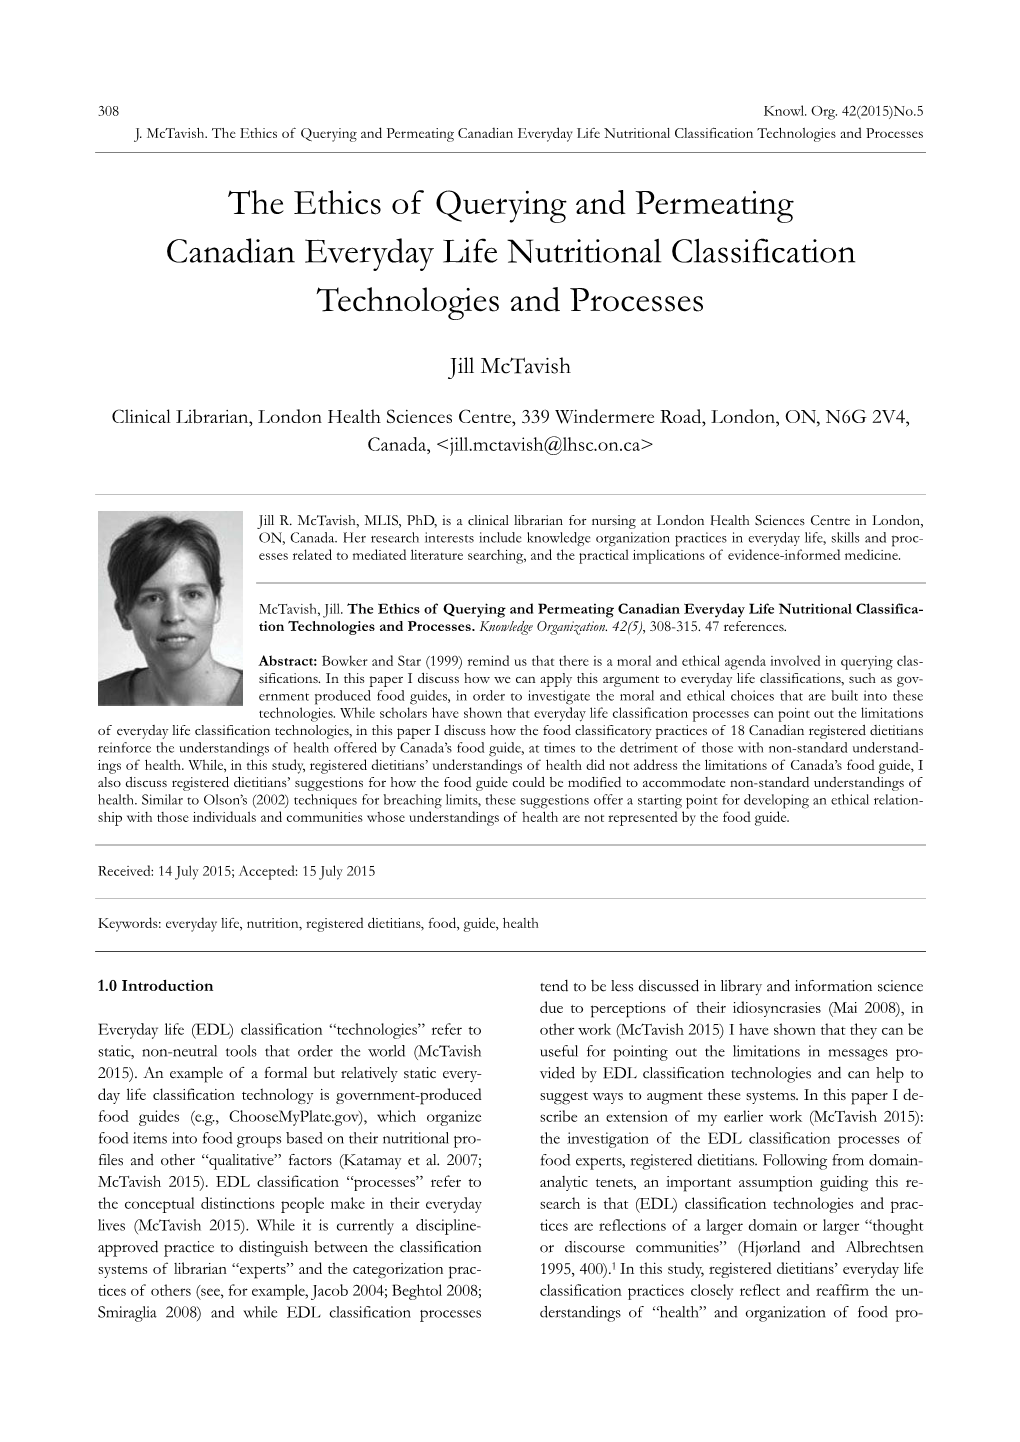 The Ethics of Querying and Permeating Canadian Everyday Life Nutritional Classification Technologies and Processes